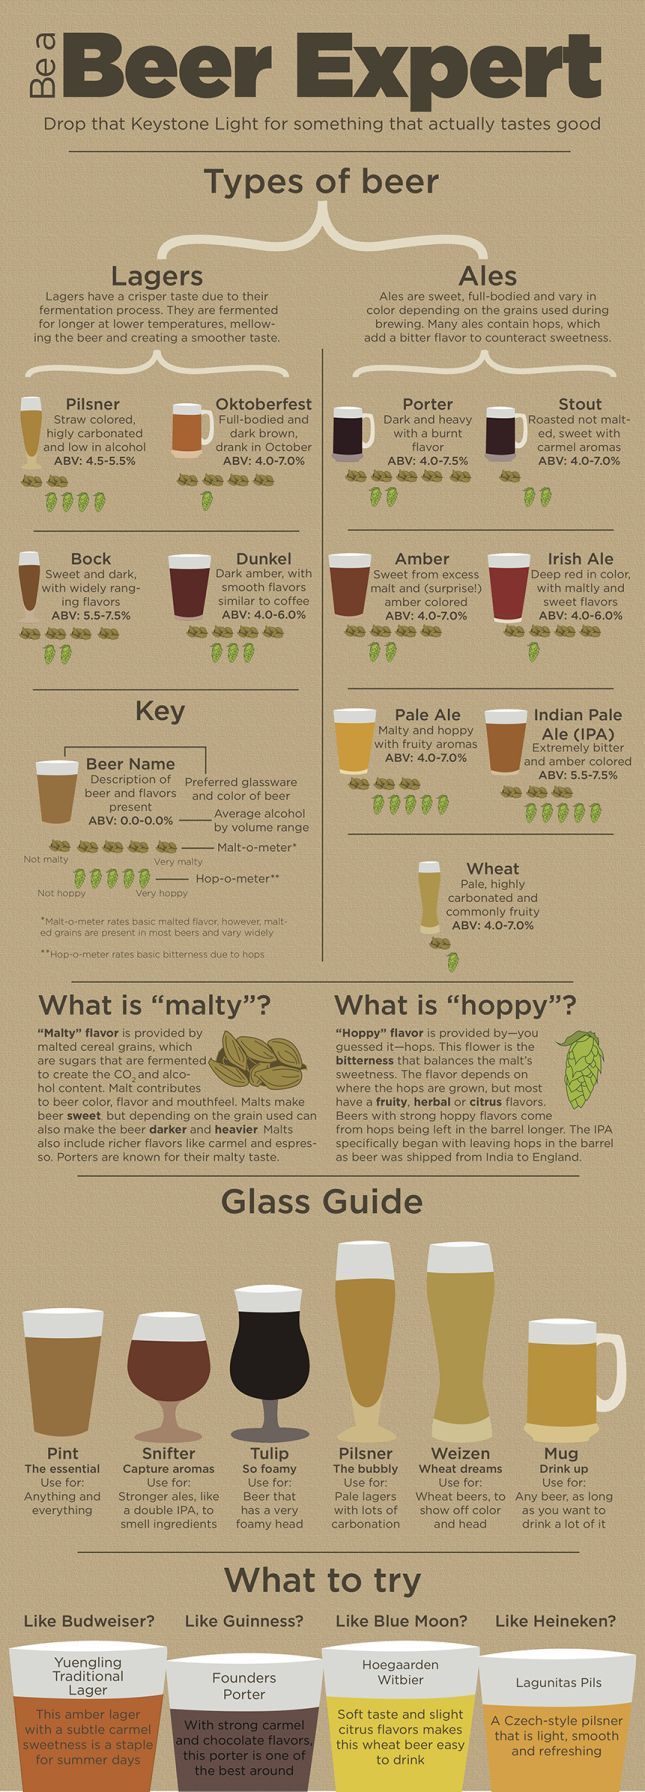 Beer Guide. I dont really like the beer Ive had before, maybe this will help me find one I like?